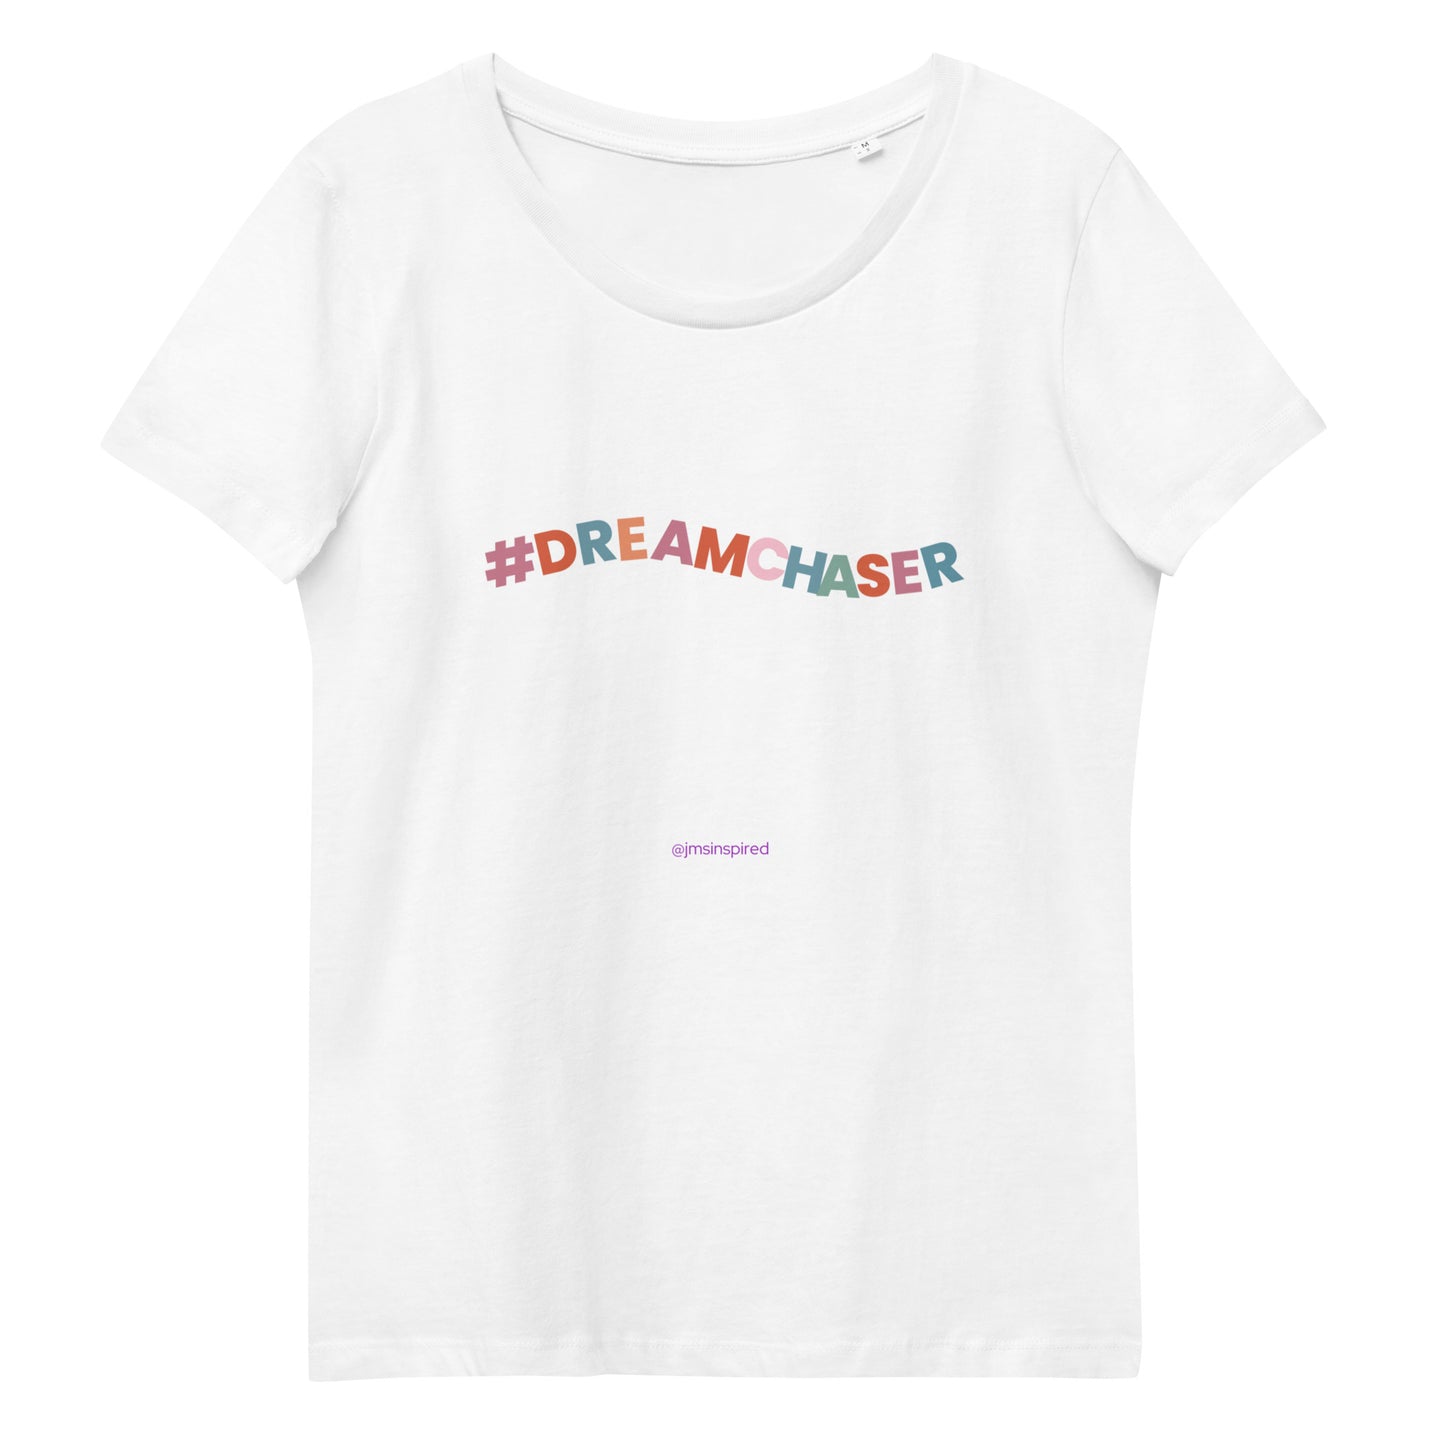 Dreamchaser Women's Fitted Tee